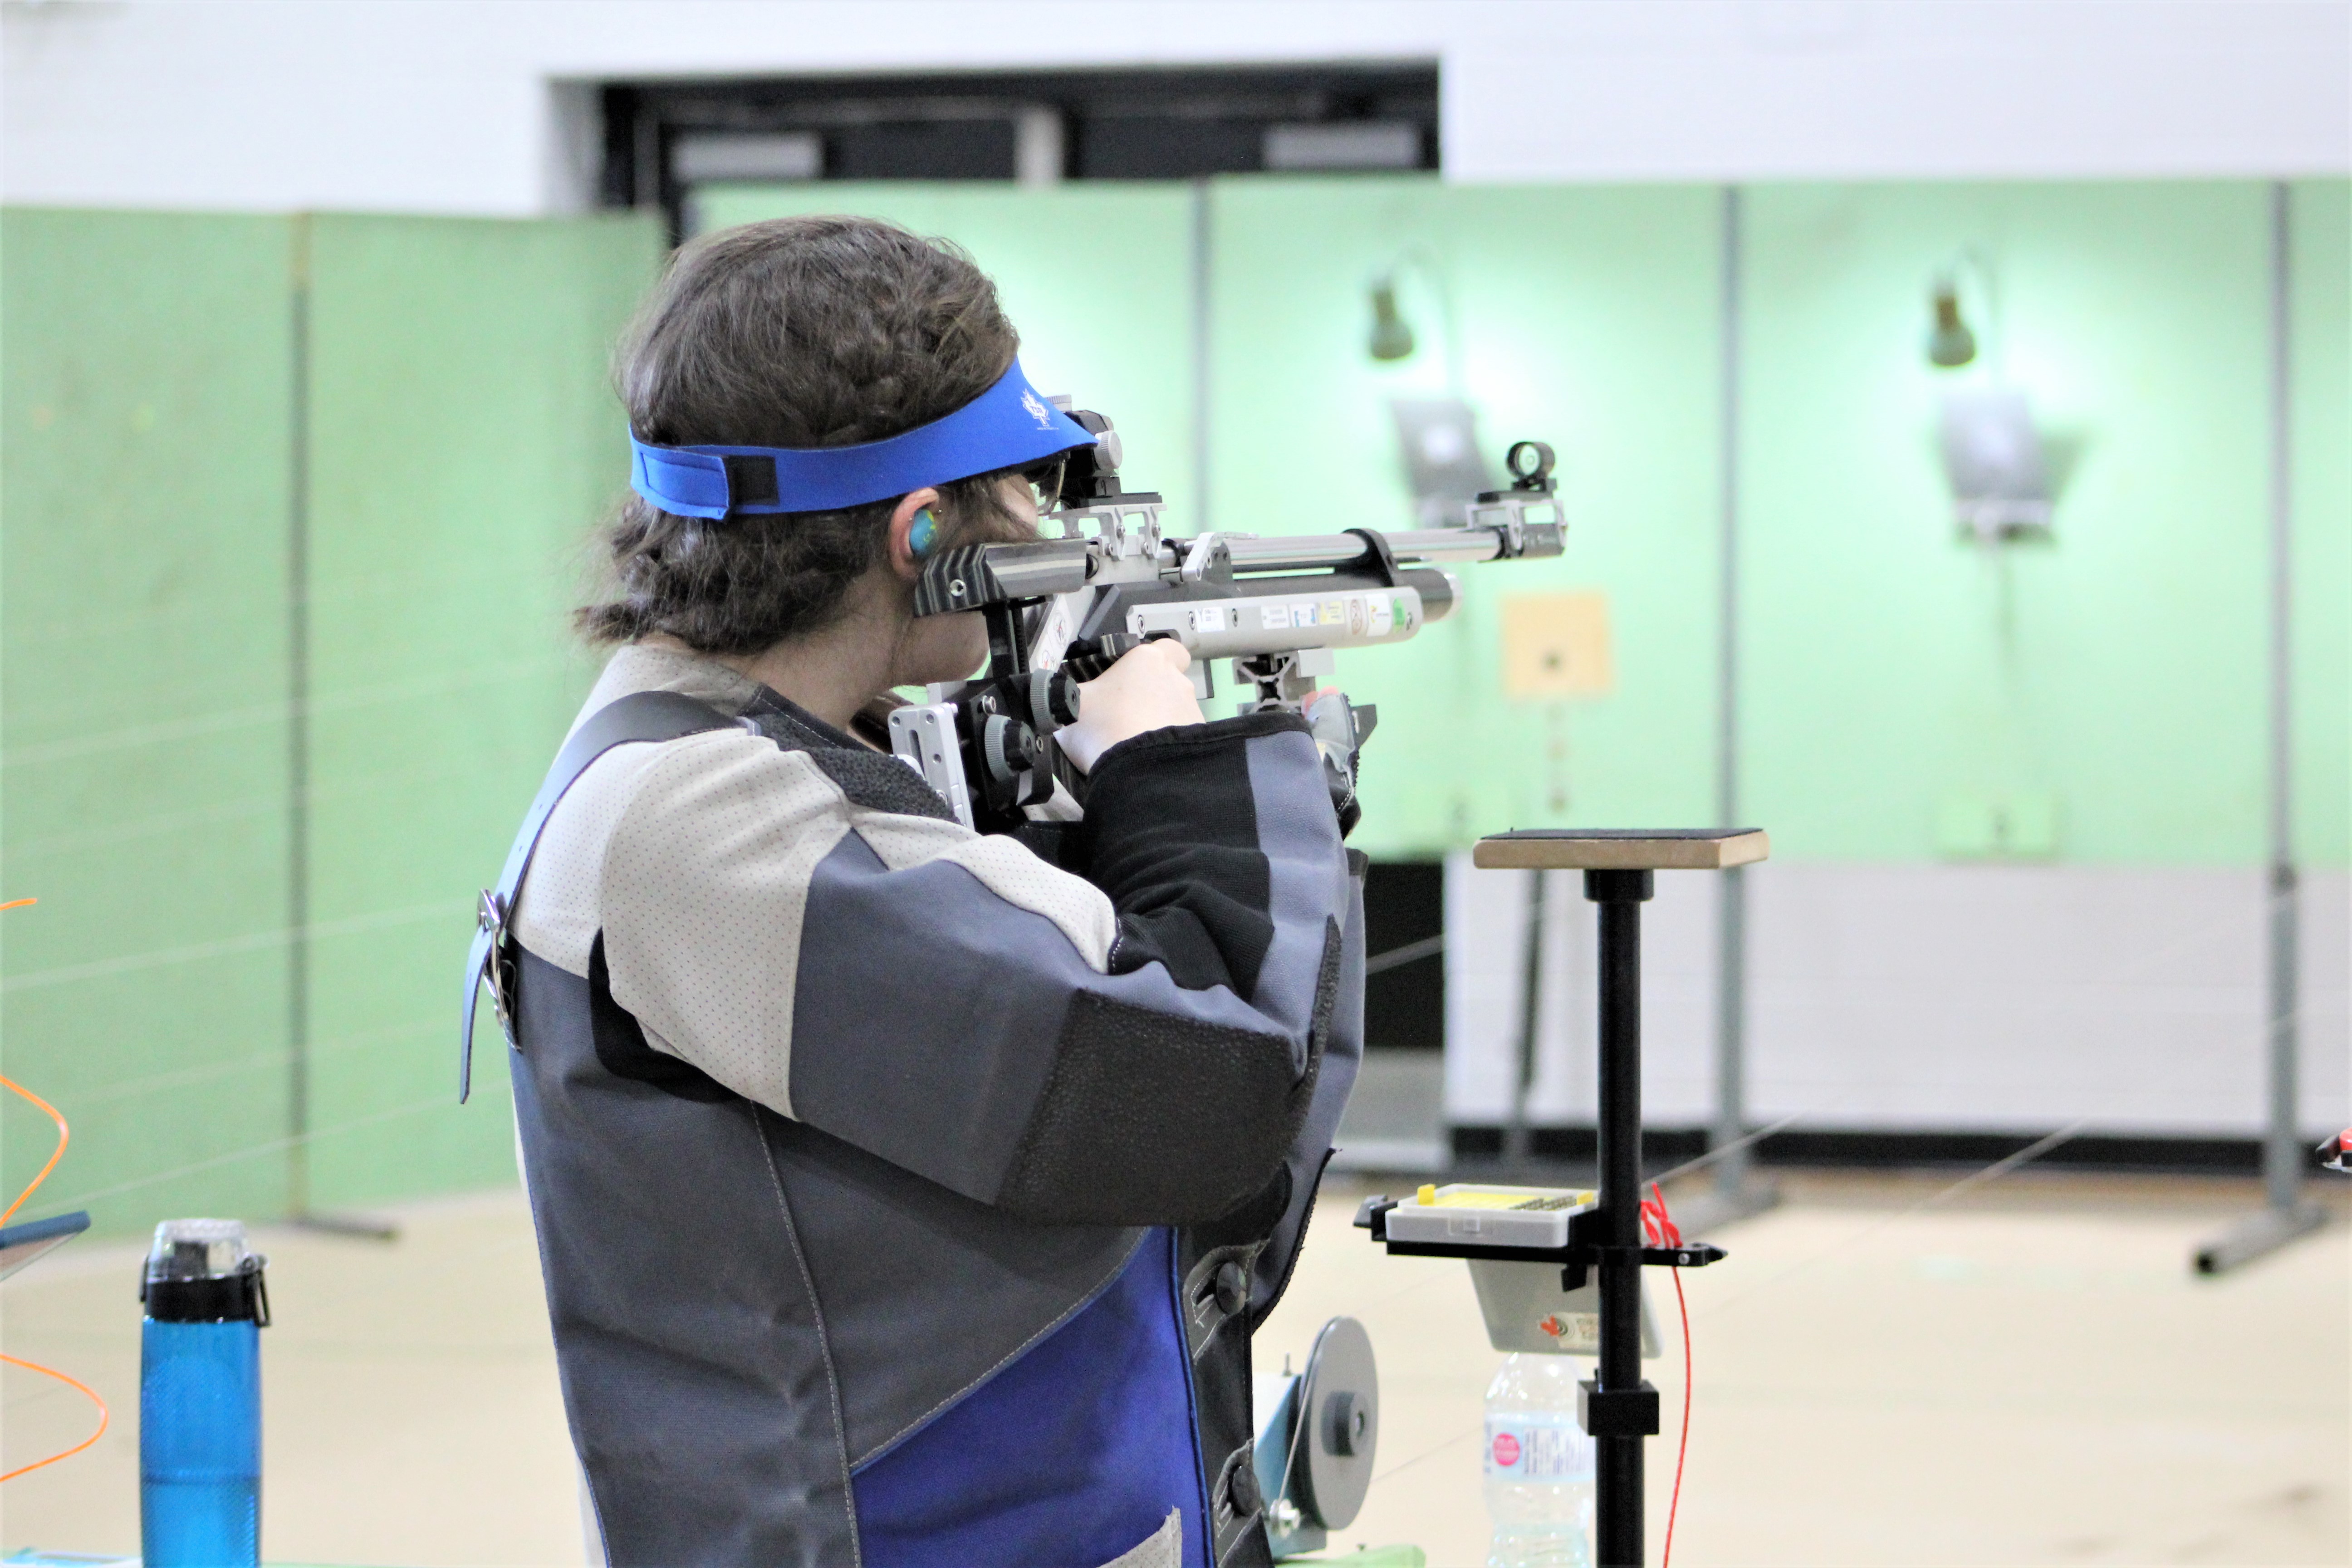 Shooters set sights on winter games gold (6 photos)